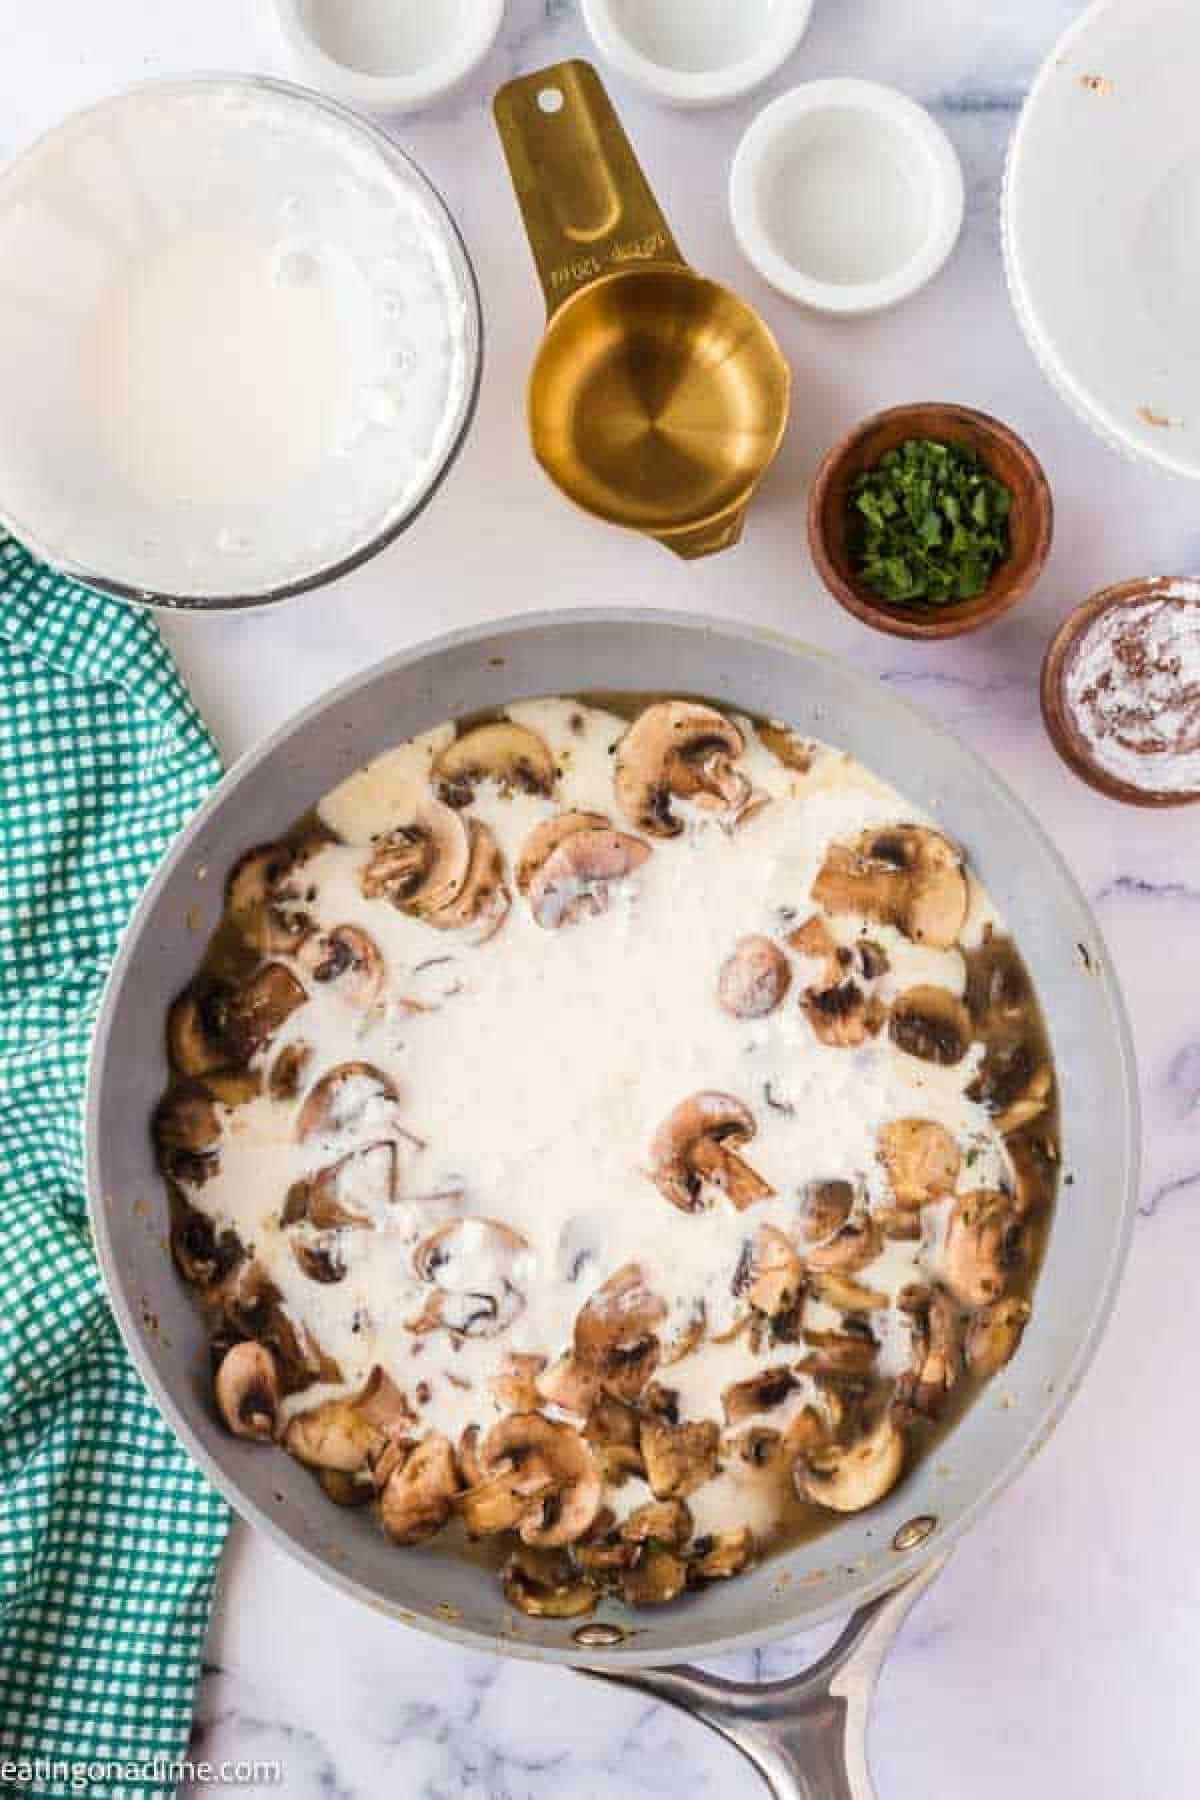 Pouring the heavy whipping cream mixture into the slice mushrooms in a skillet